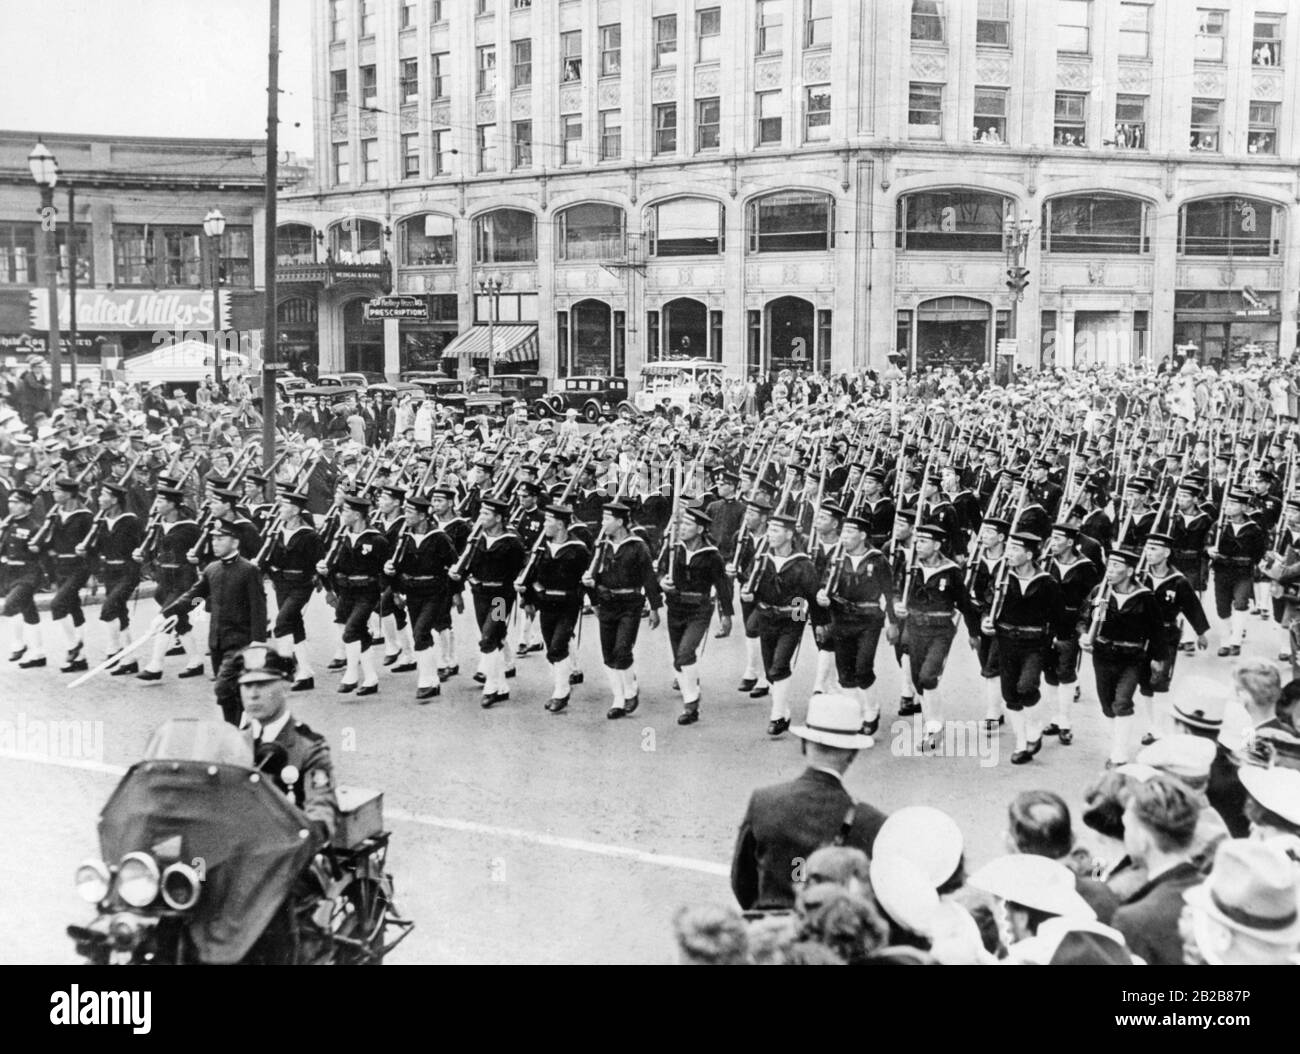 A unit of Japanese sailors marches armed on a street in Seattle in the state of Washington in the U.S. as part of the celebrations marking the independence of the United States on July 4, 1936. The street is lined on both sides with spectators. In front of the sailors drives a policeman on a motorbike. Stock Photo